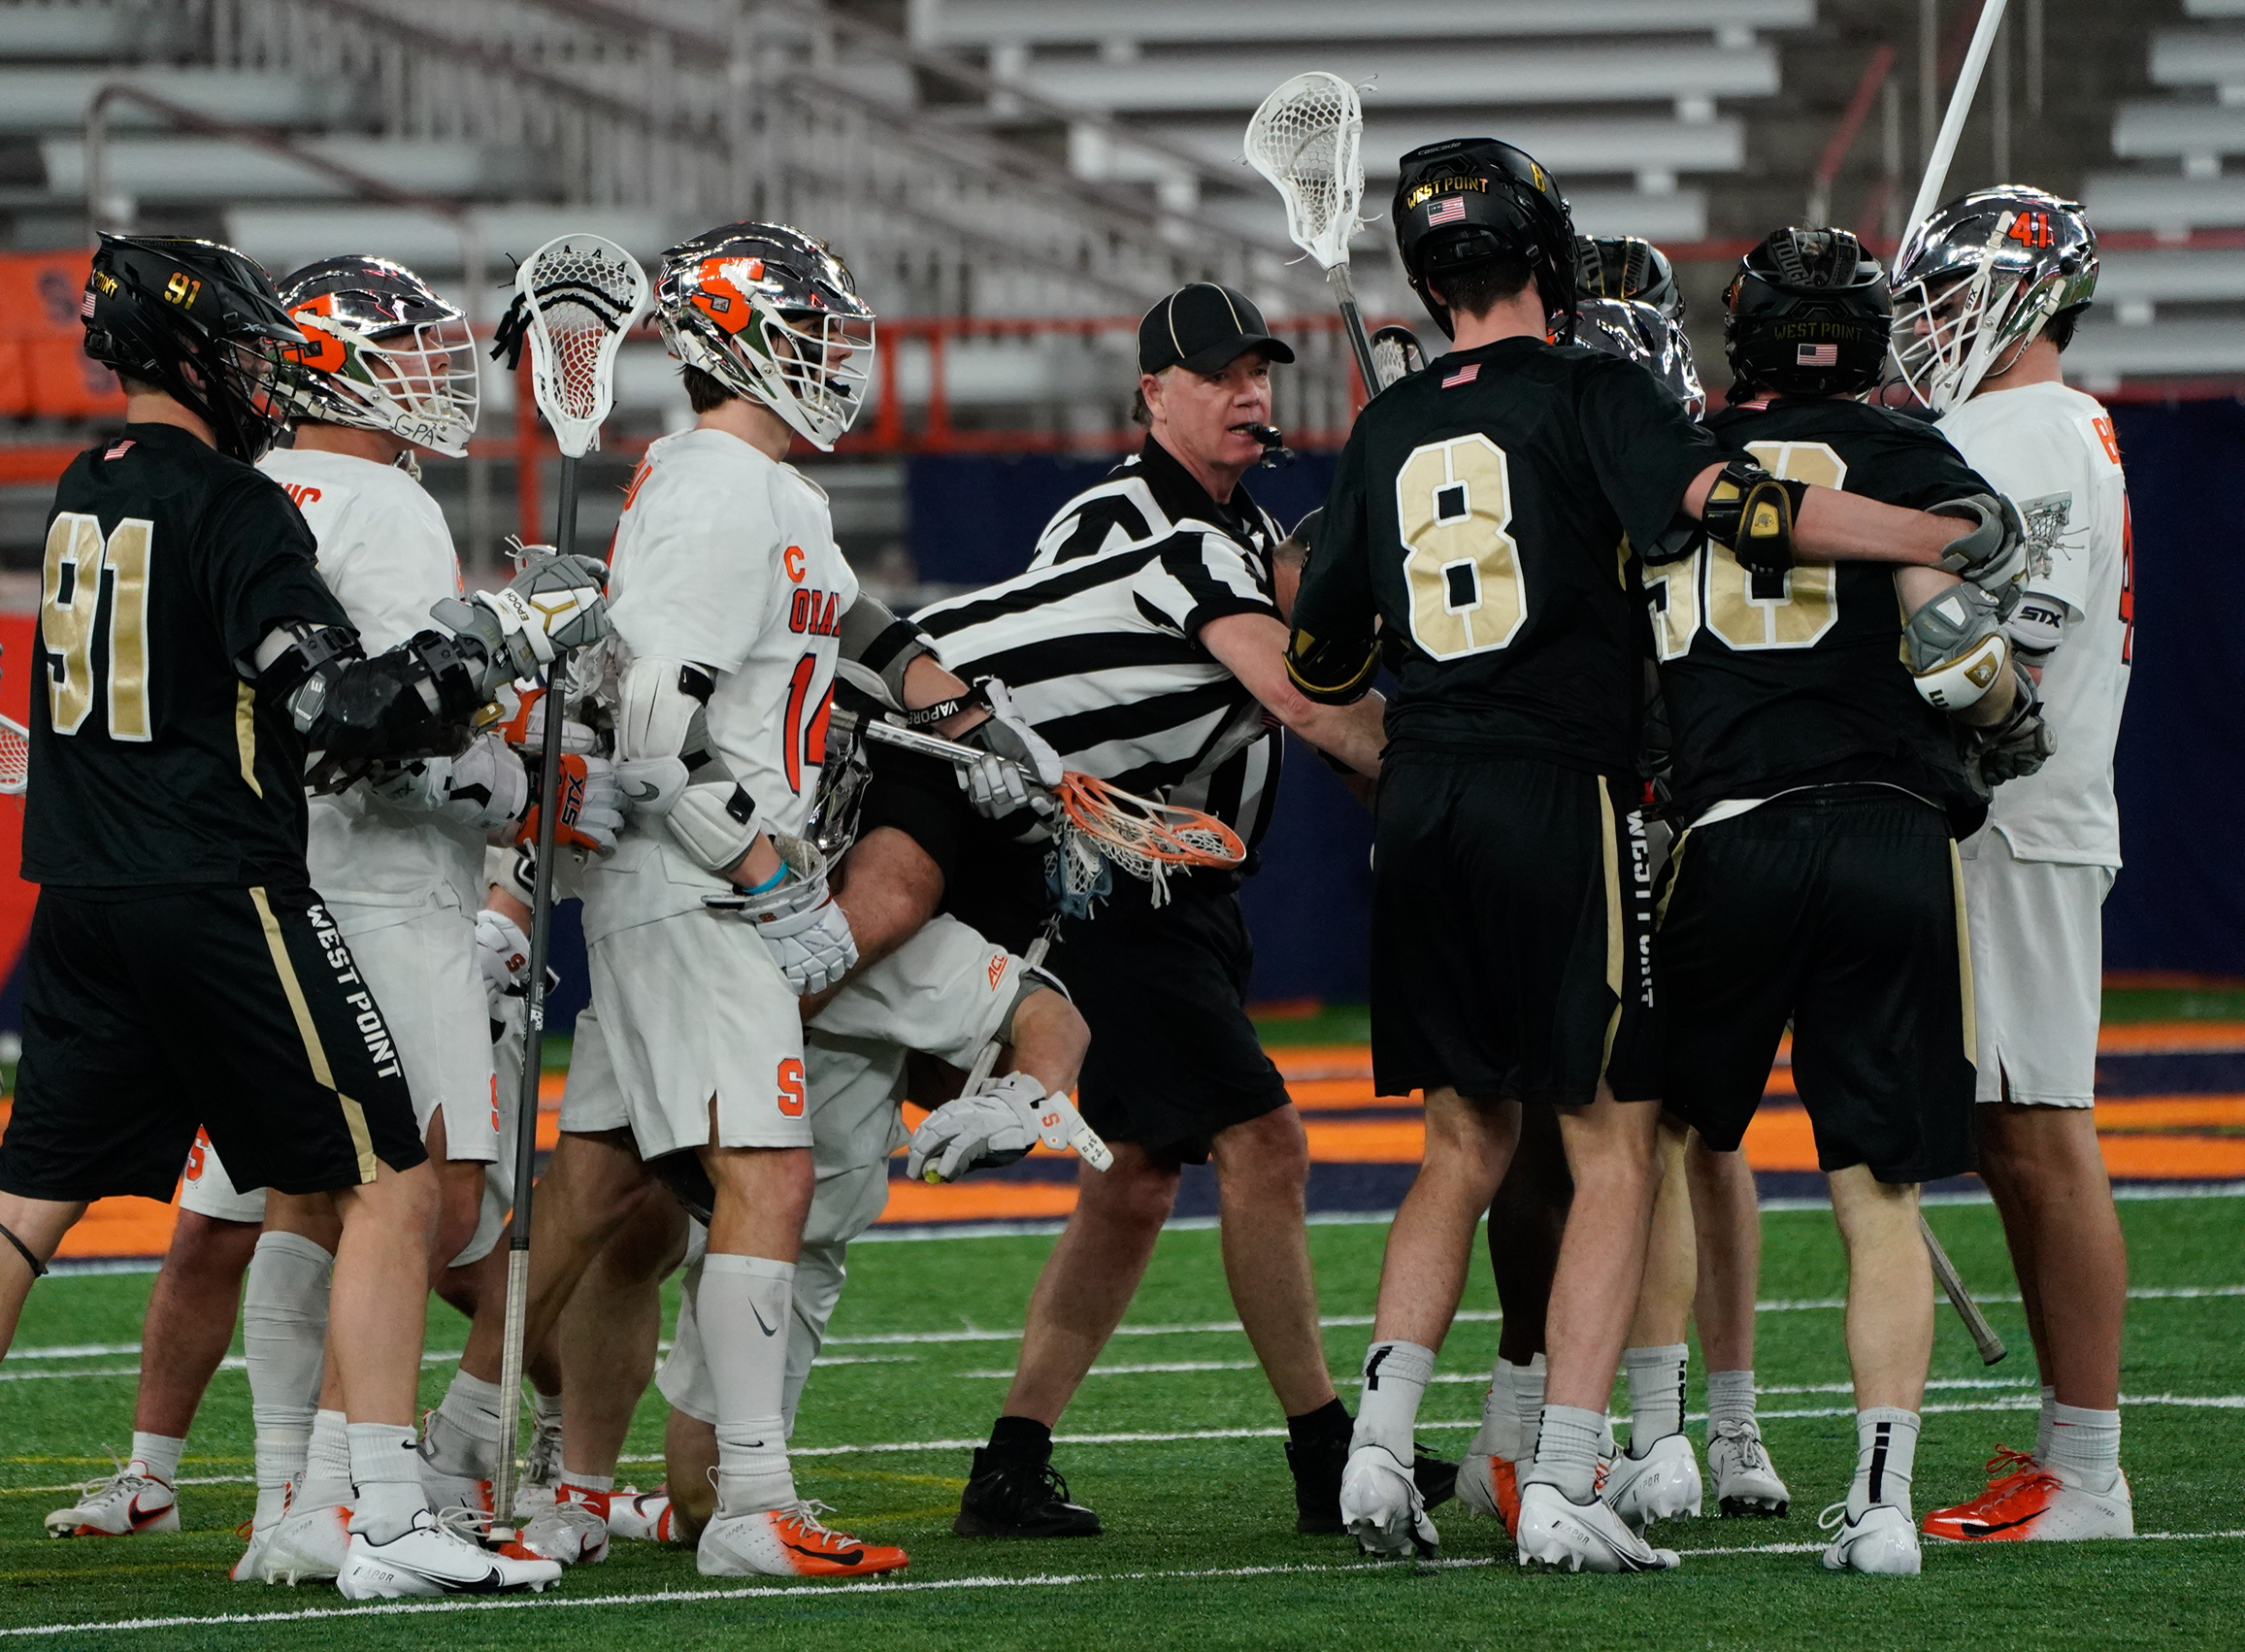 Syracuse men’s lacrosse loses third straight, falls to No. 13 Army 17-13